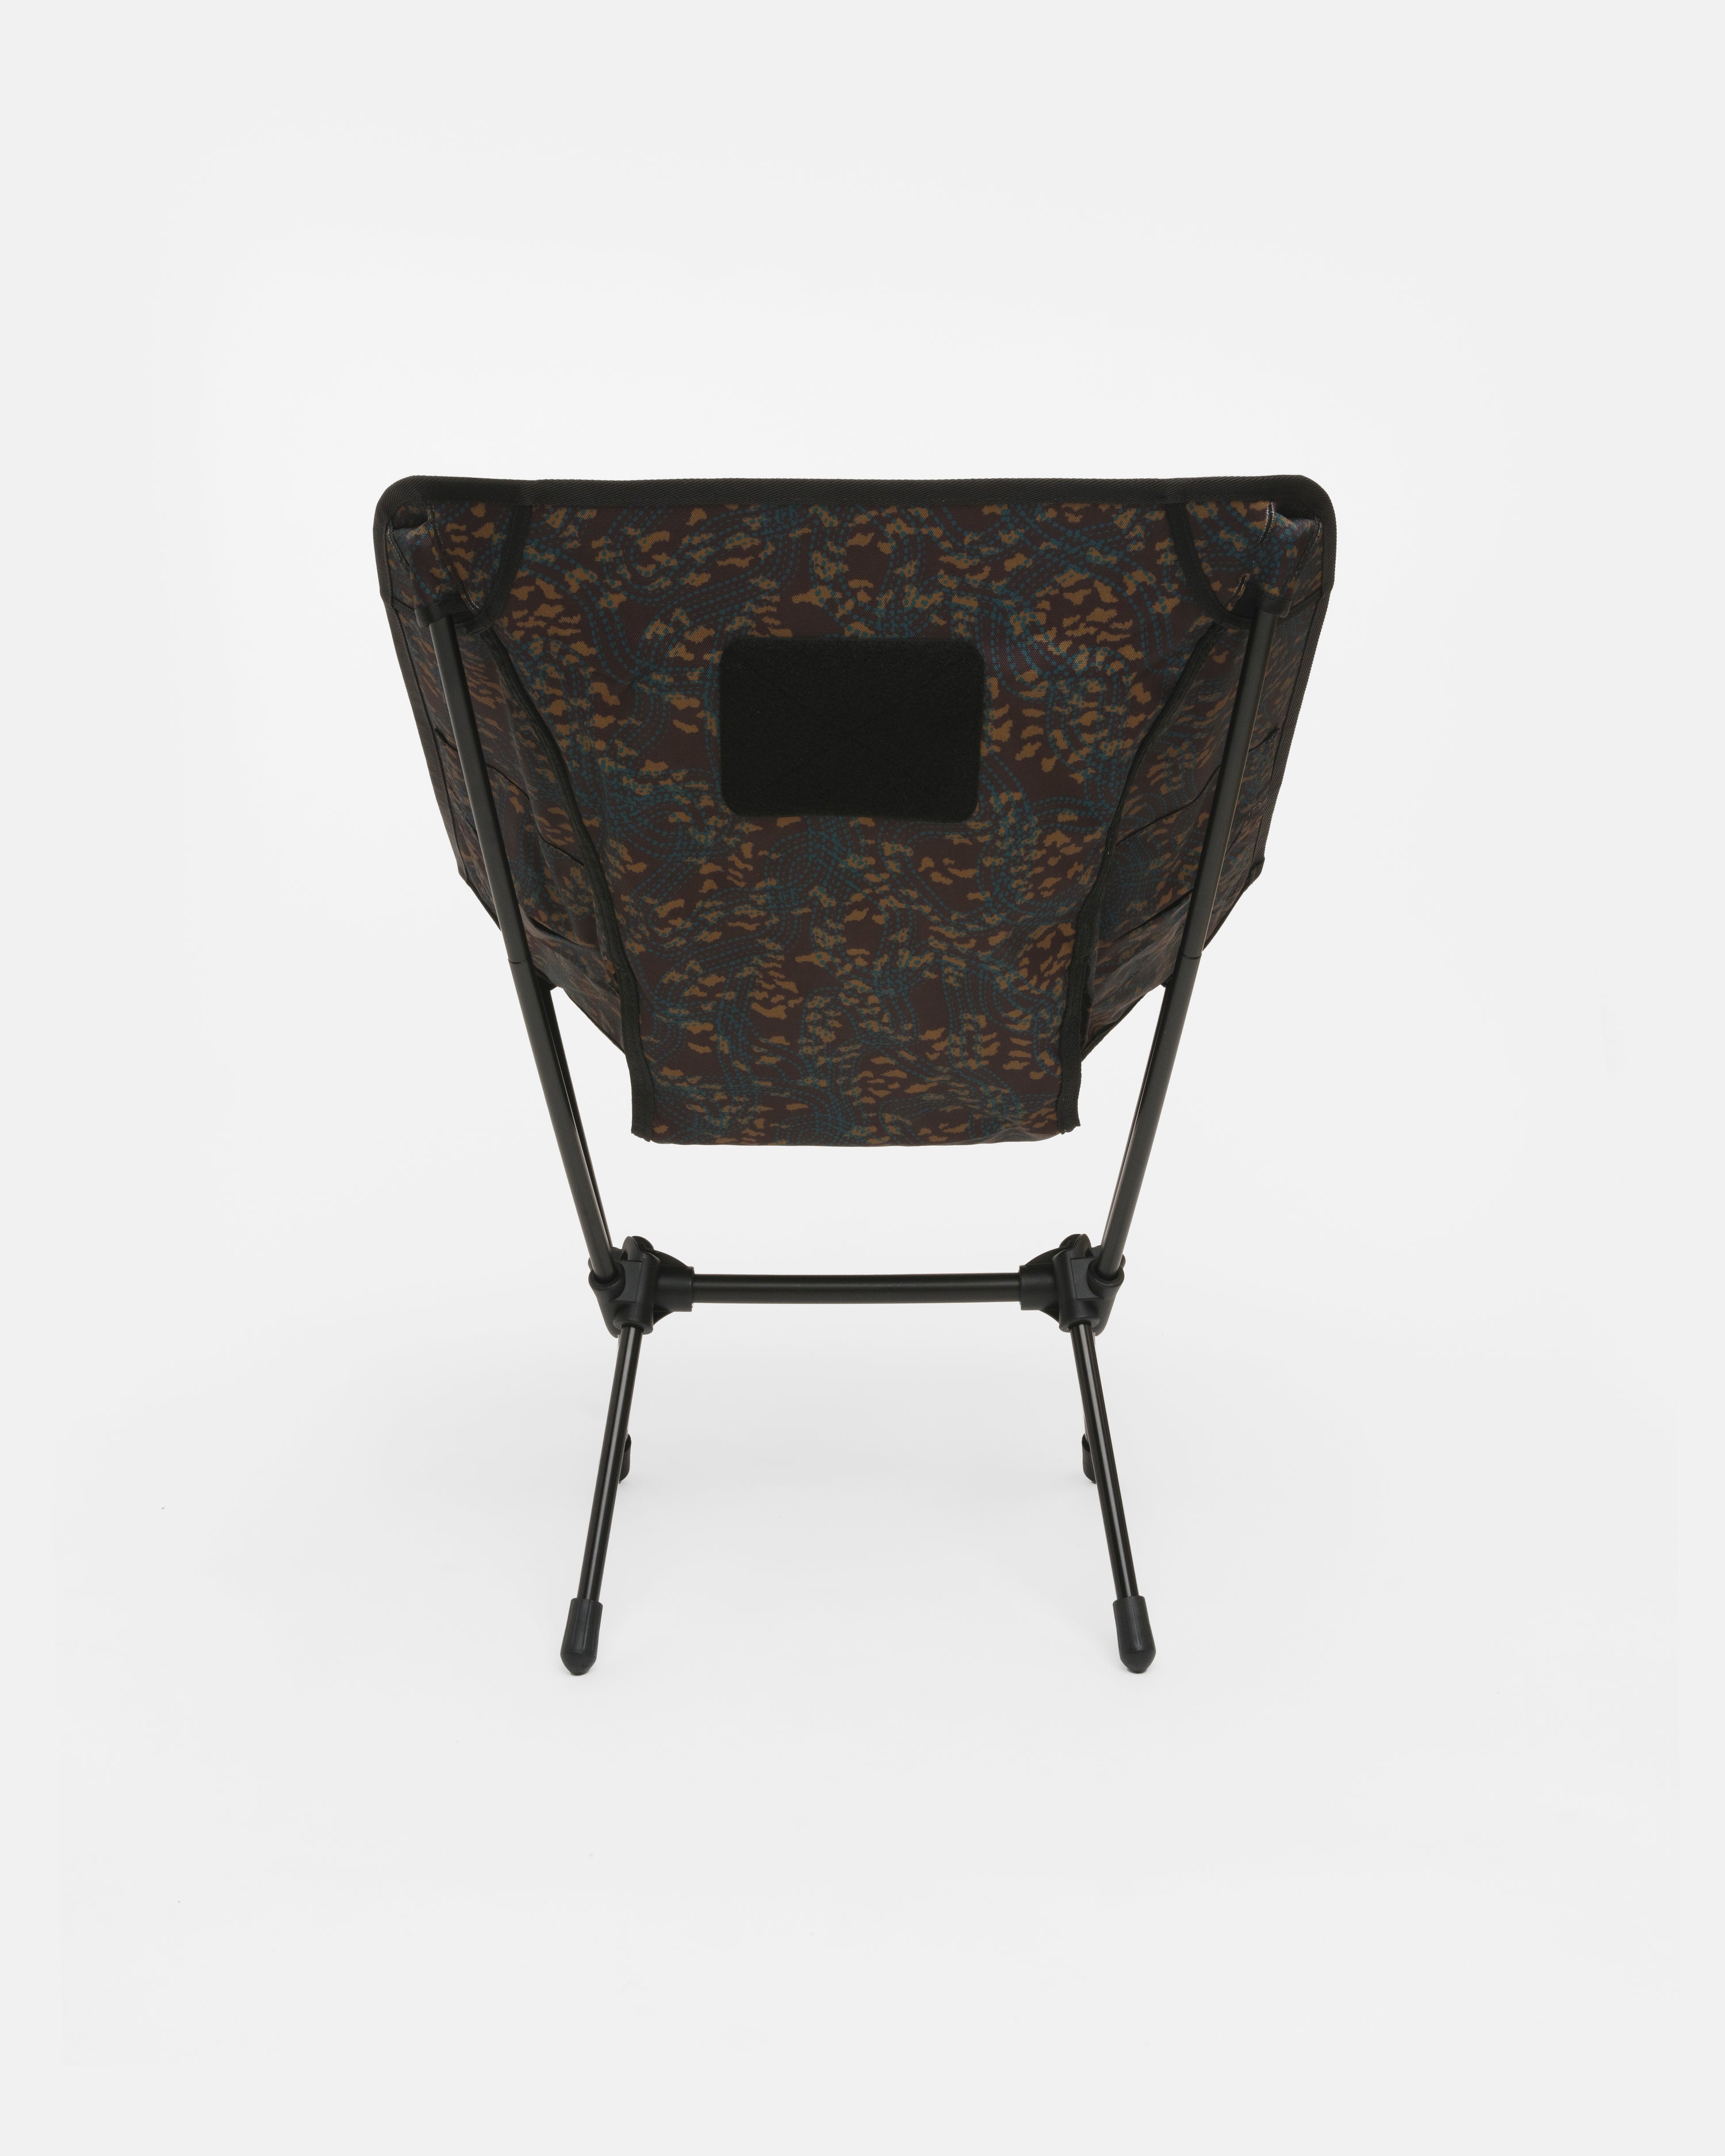 HELINOX TACTICAL CHAIR ONE - OBSIDIAN "TRACKS" PRINTED 600D RECYCLED POLYESTER CANVAS